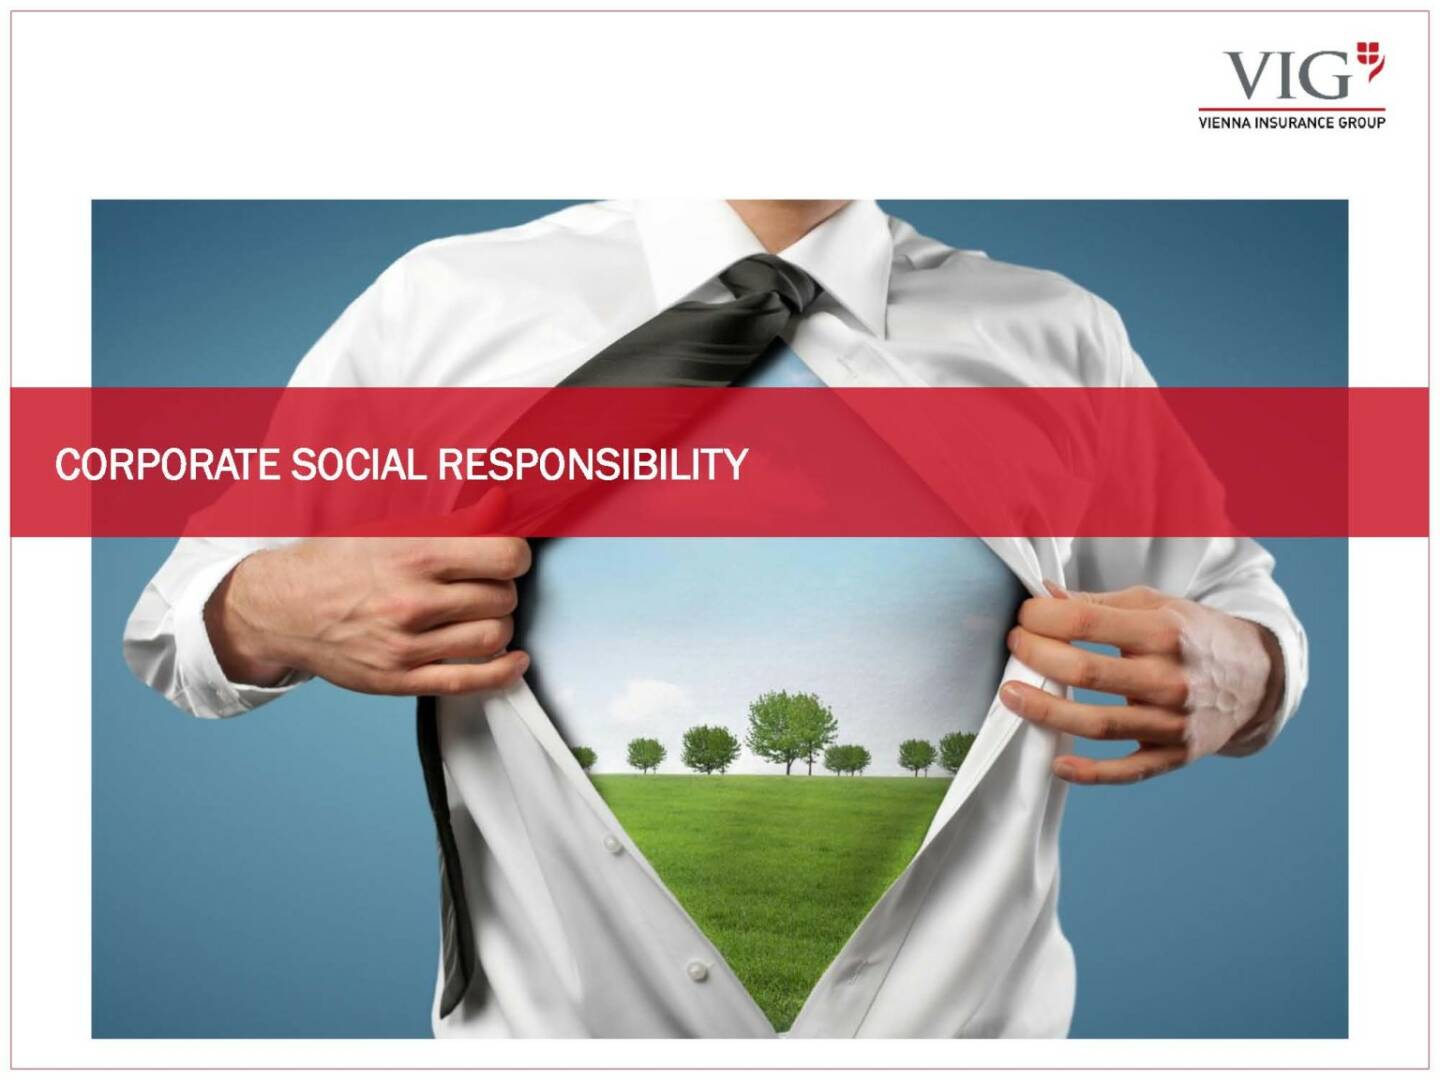 Vienna Insurance Group - Corporate Social Responsibility